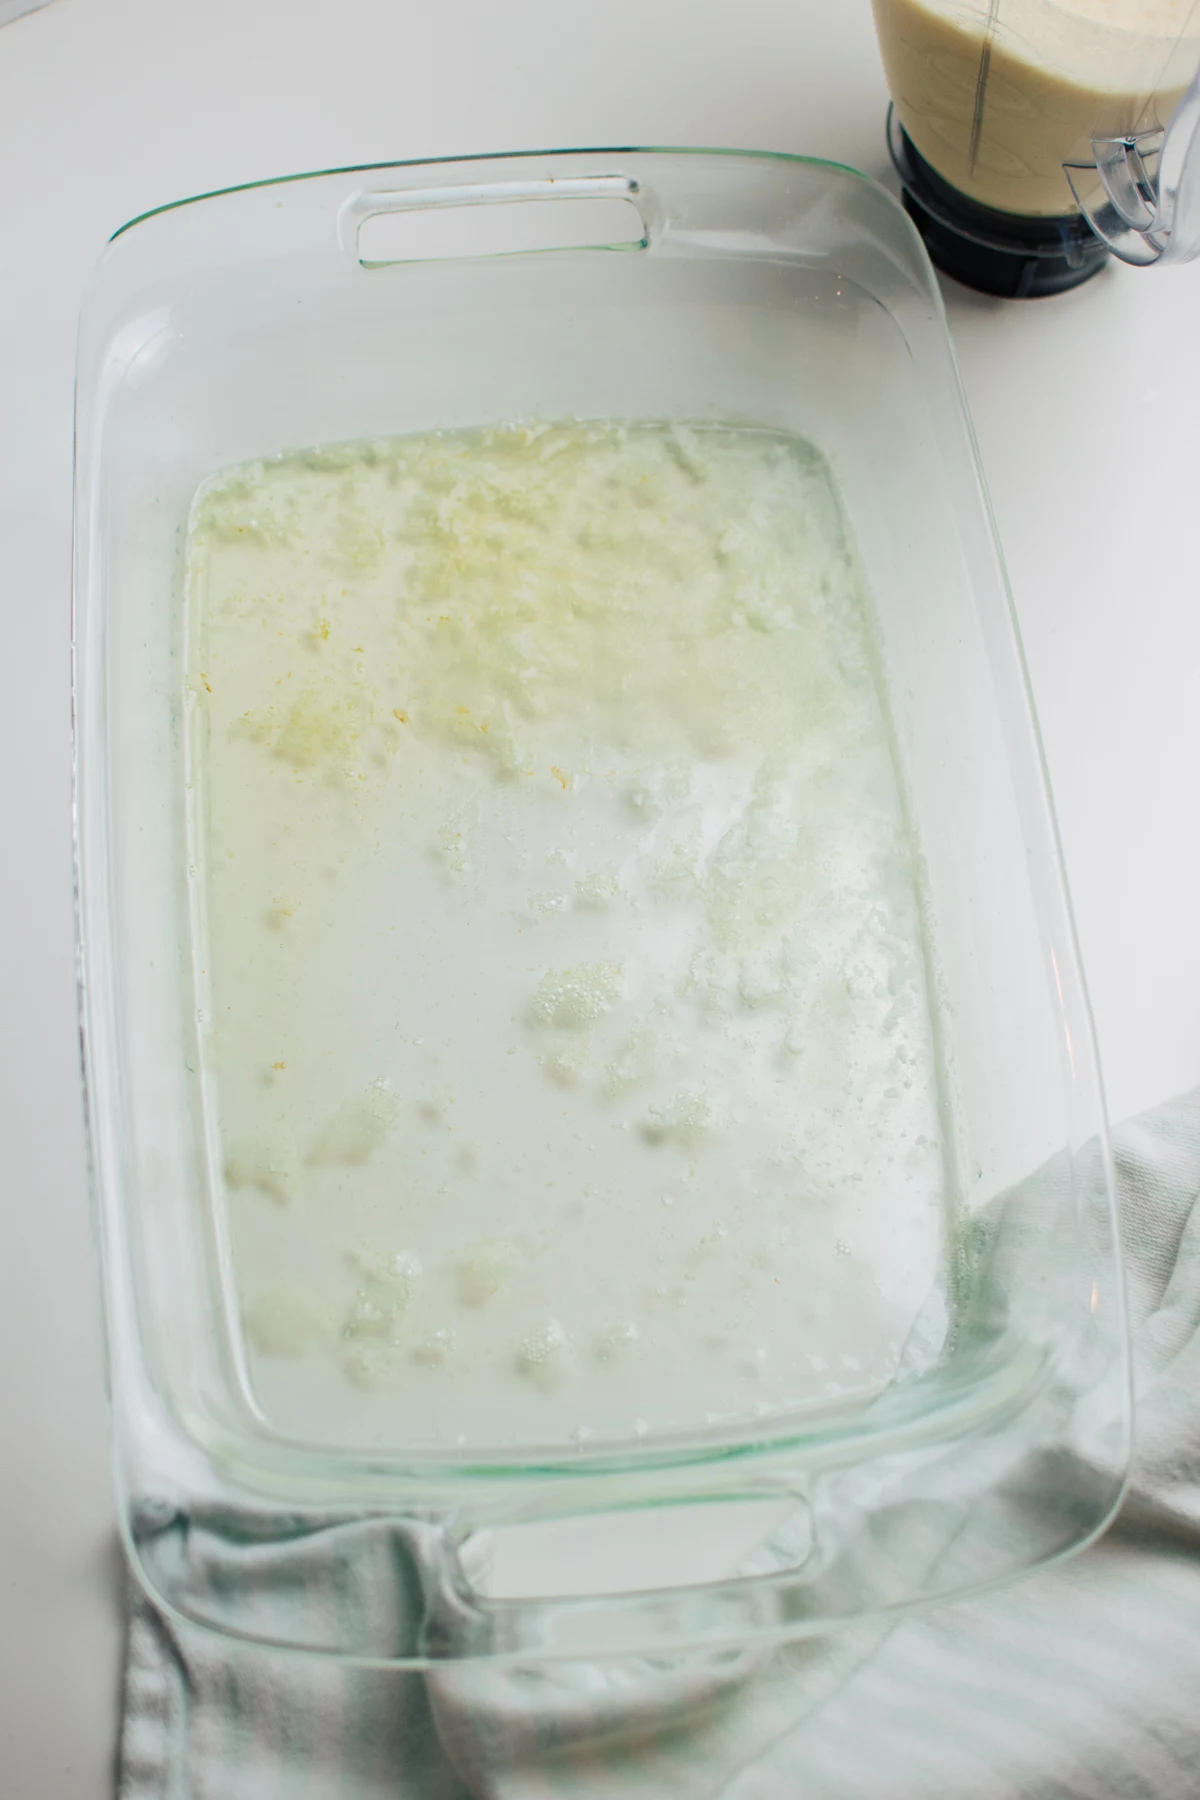 Melted butter in clear glass casserole baking dish with blue and white striped kitchen towel.